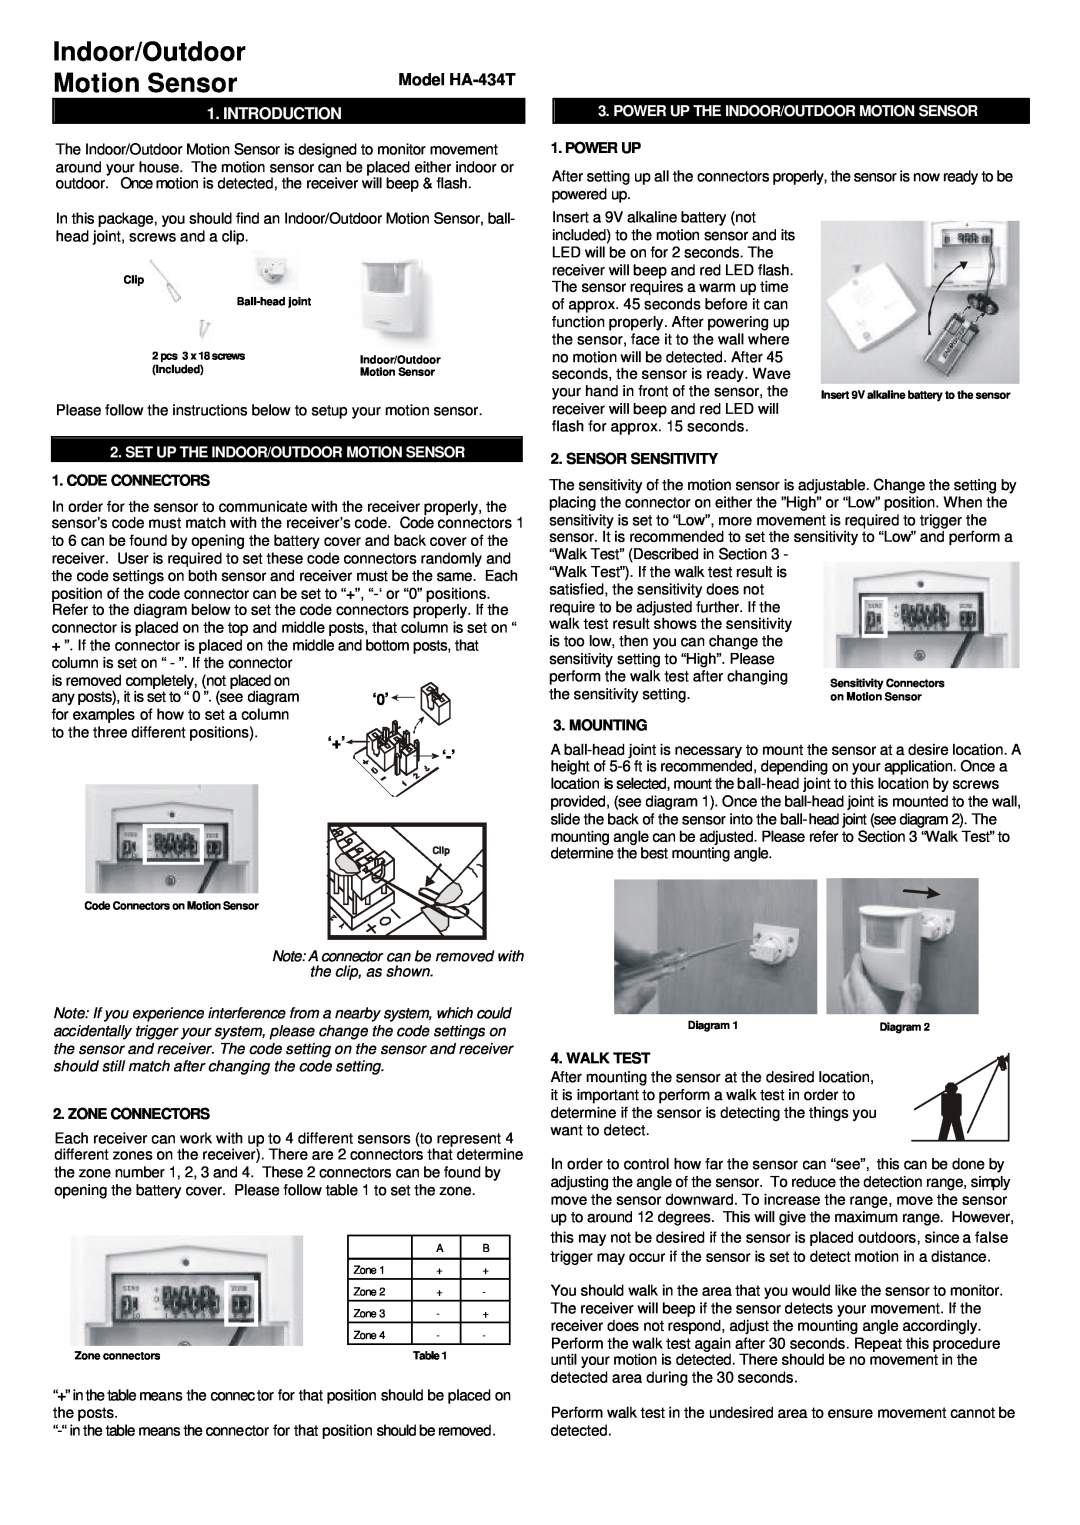 SkyLink HA-434T manual Set Up The Indoor/Outdoor Motion Sensor, Code Connectors, for examples of how to set a column 